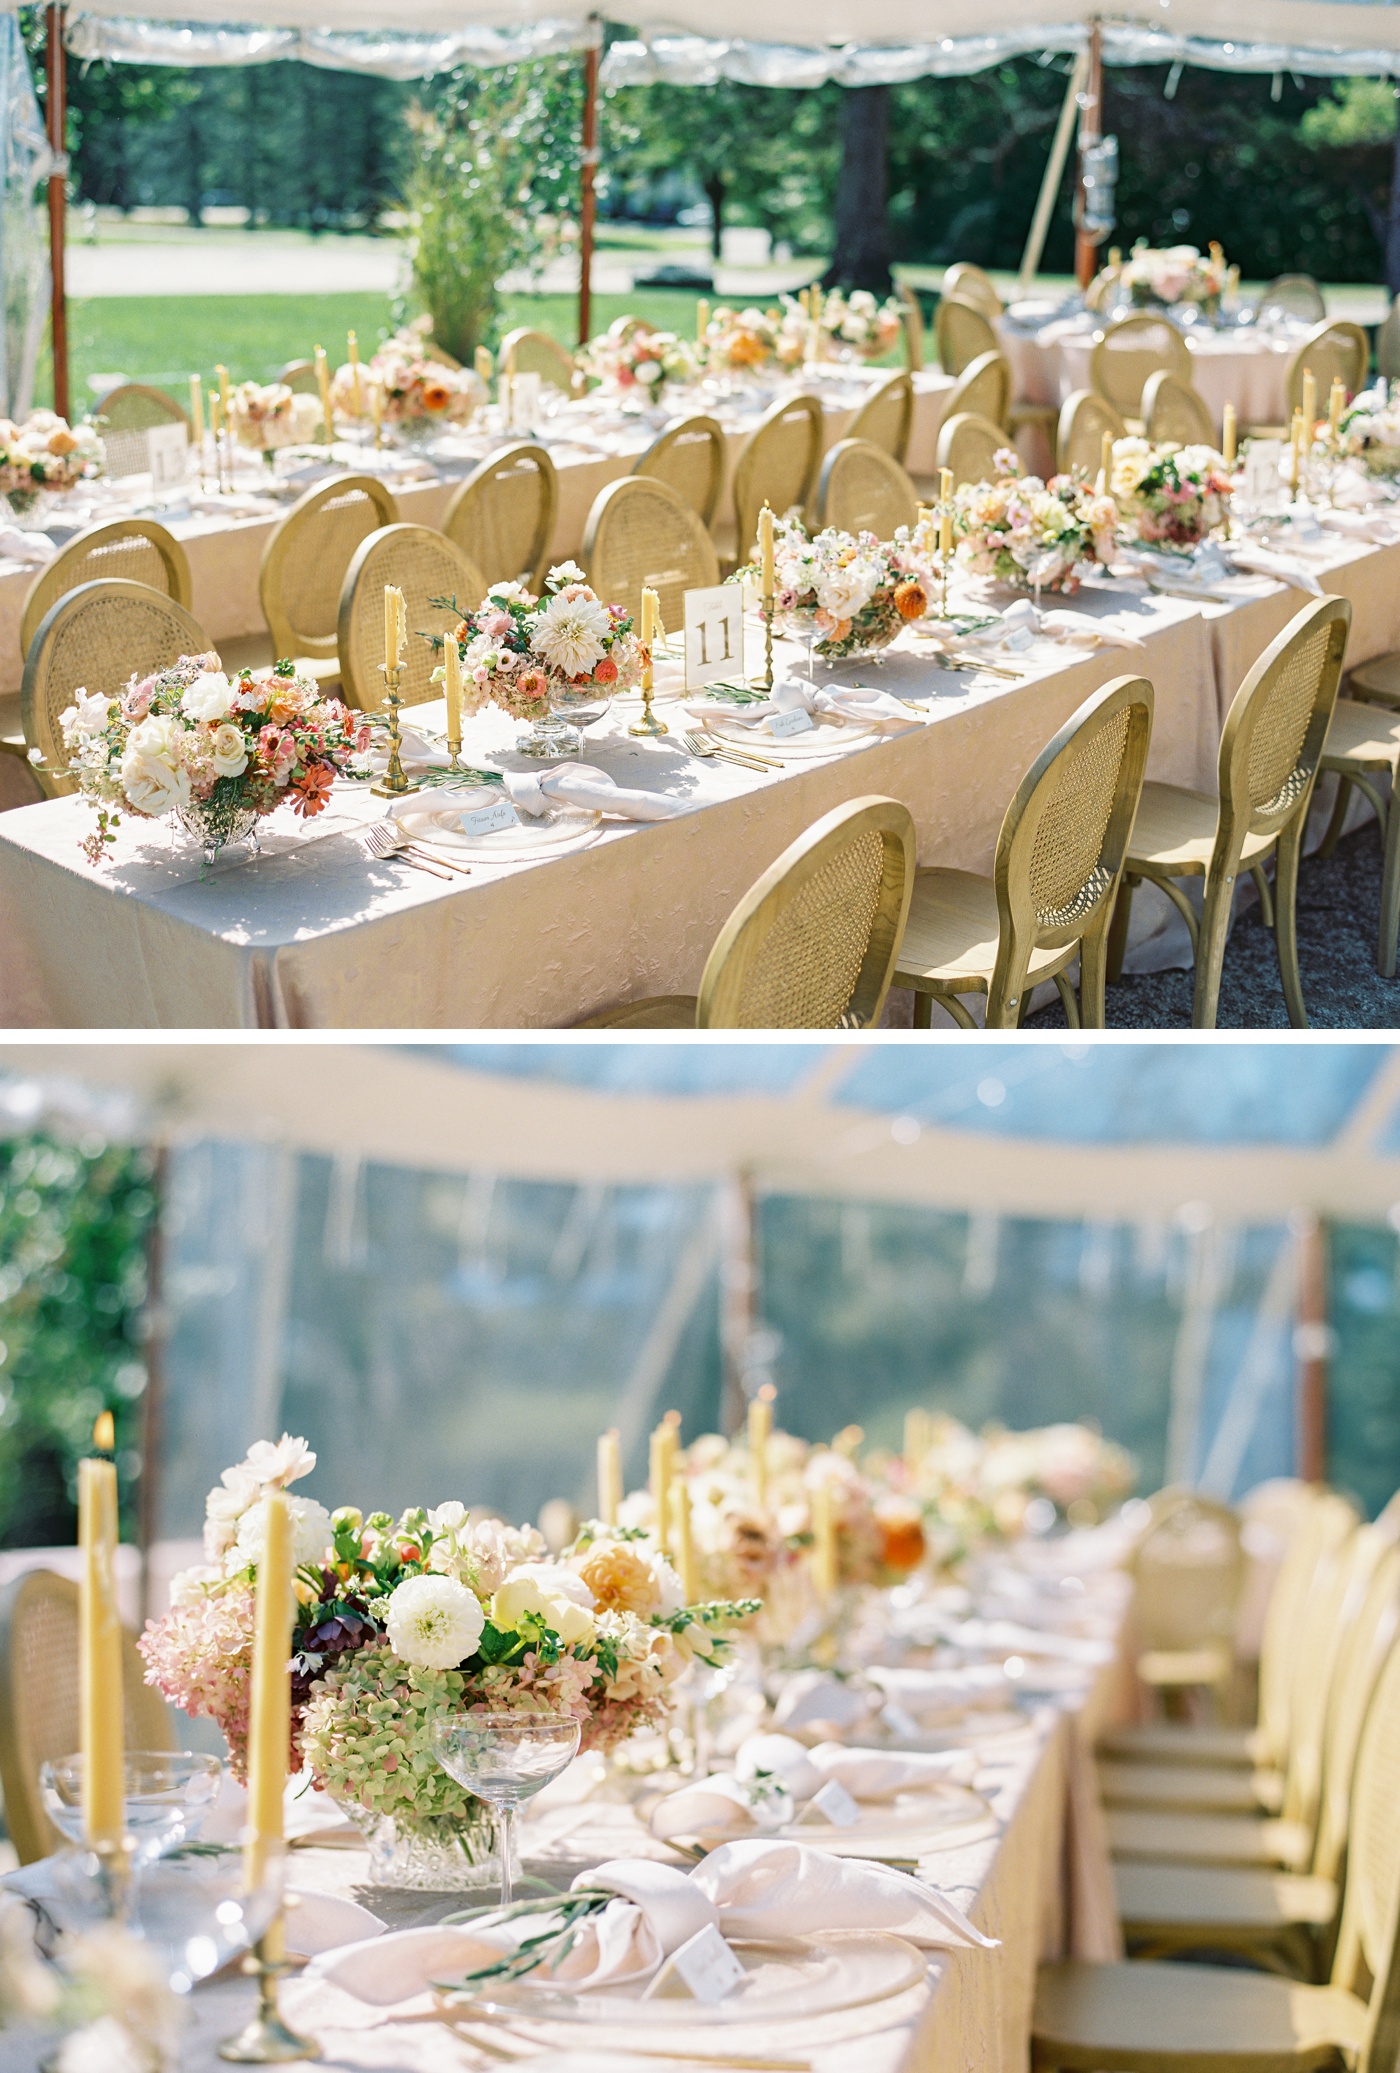 Cane back chairs, pink linens, and colorful flowers for a wedding reception